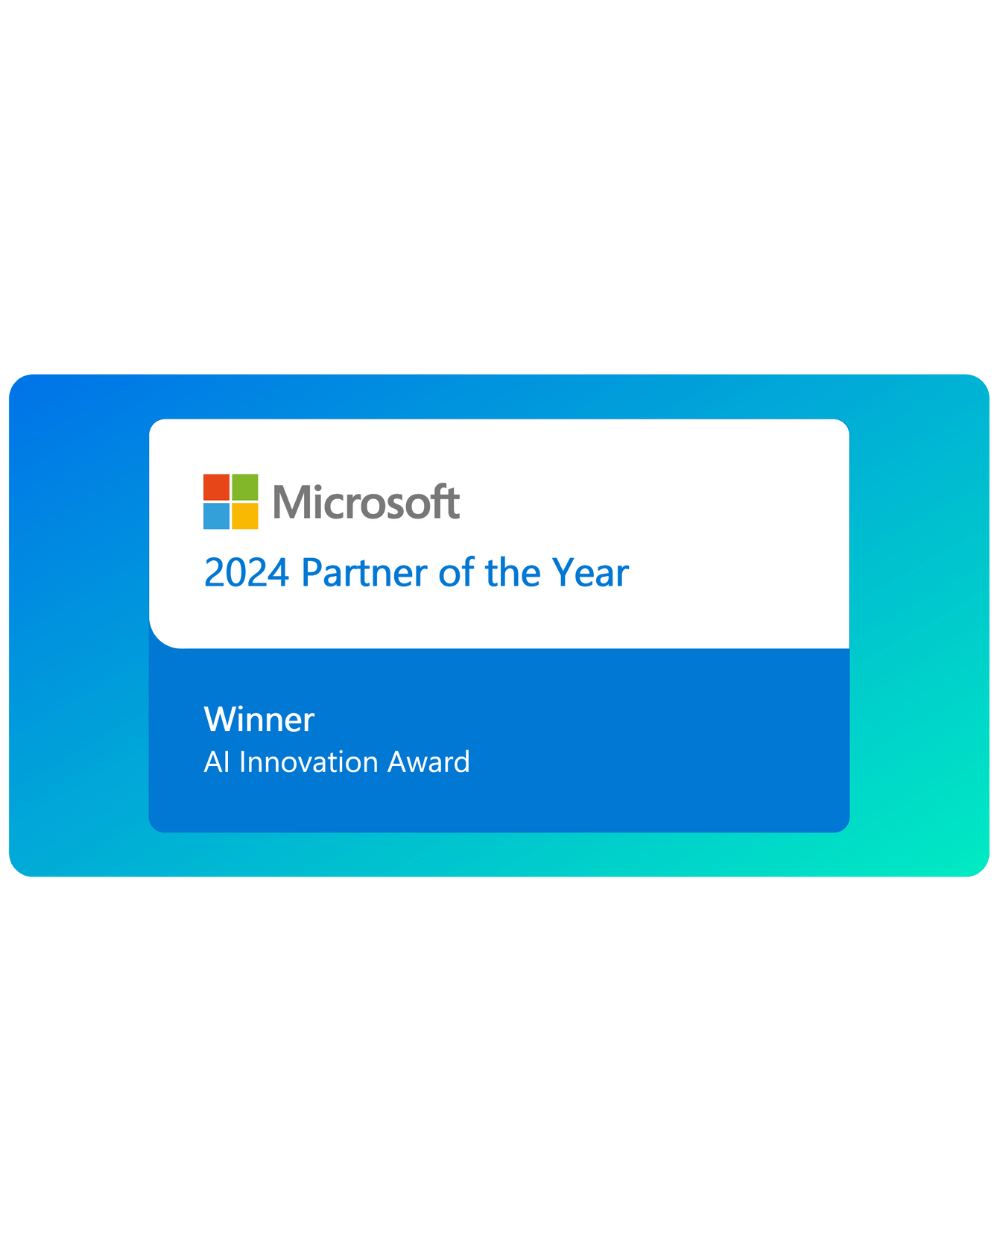 The financial crime prevention solution helps SymphonyAI win the Microsoft 2024 Partner of the Year for AI Innovation 